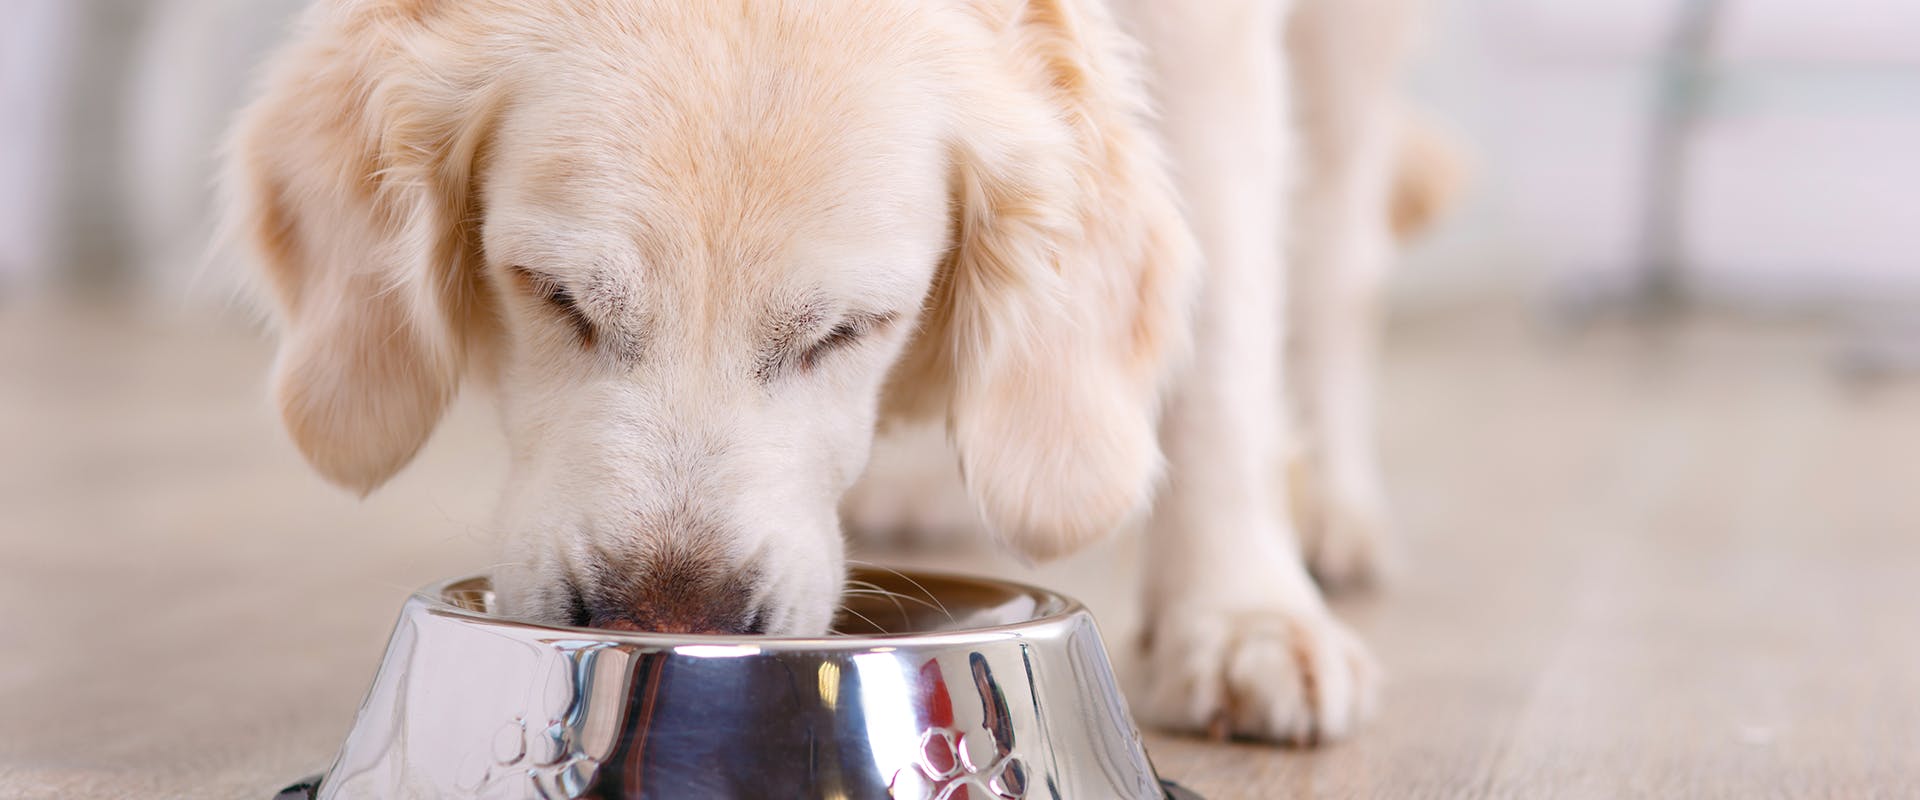 A young puppy eating natural dog food from a steel dog bowl